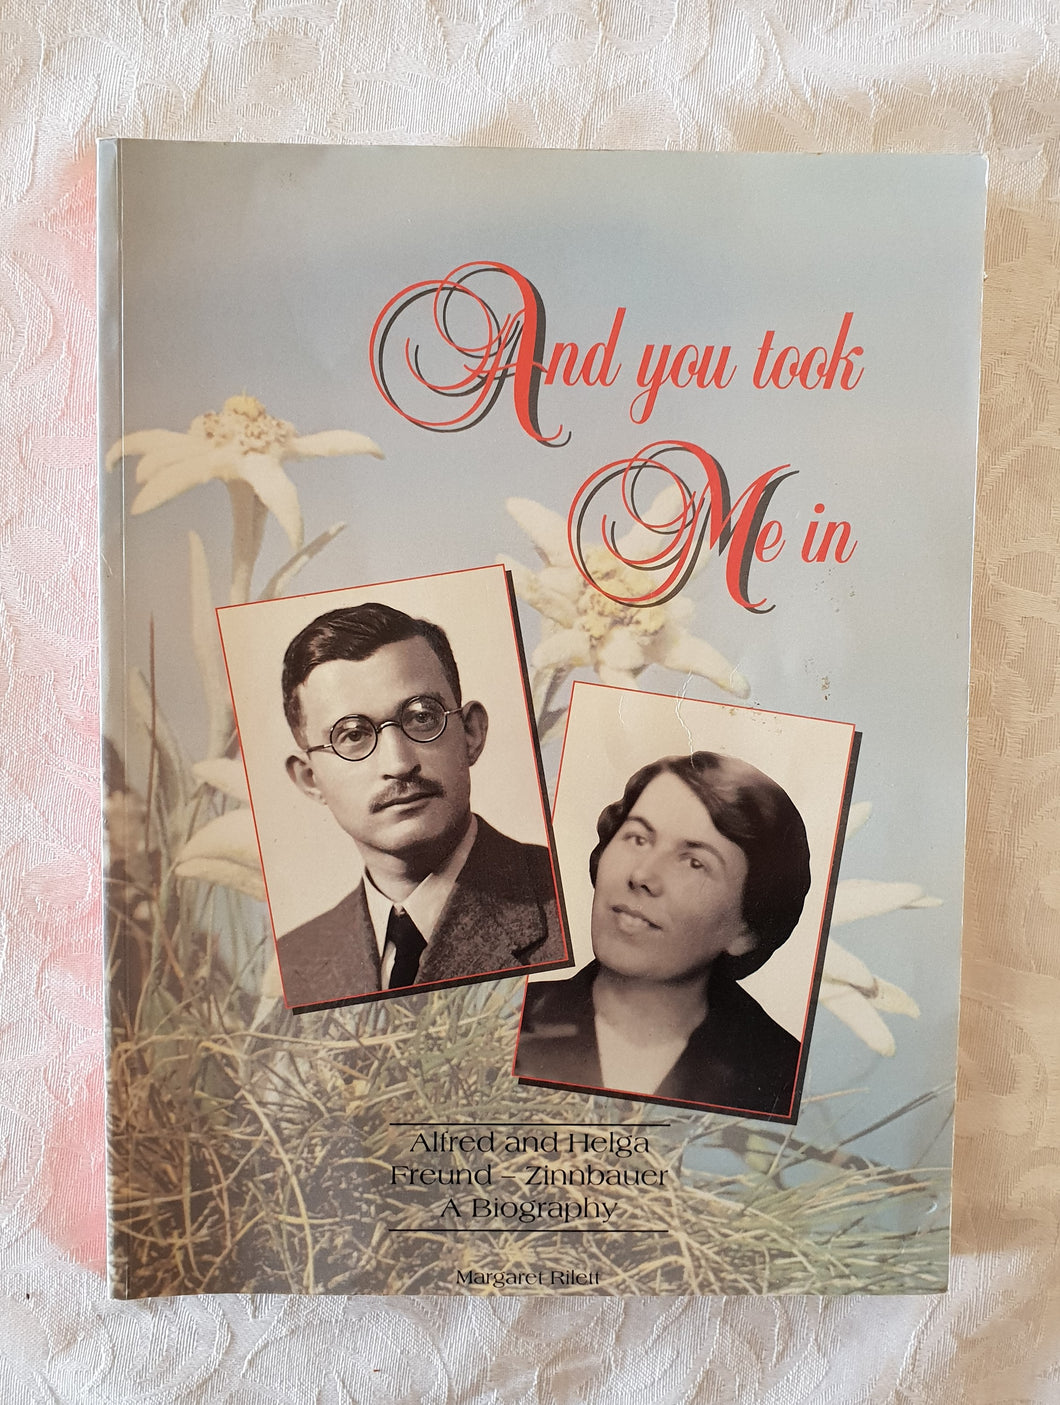 And You Took Me In - Alfred and Helga Freund-Zinnbauer by Margaret Rilett